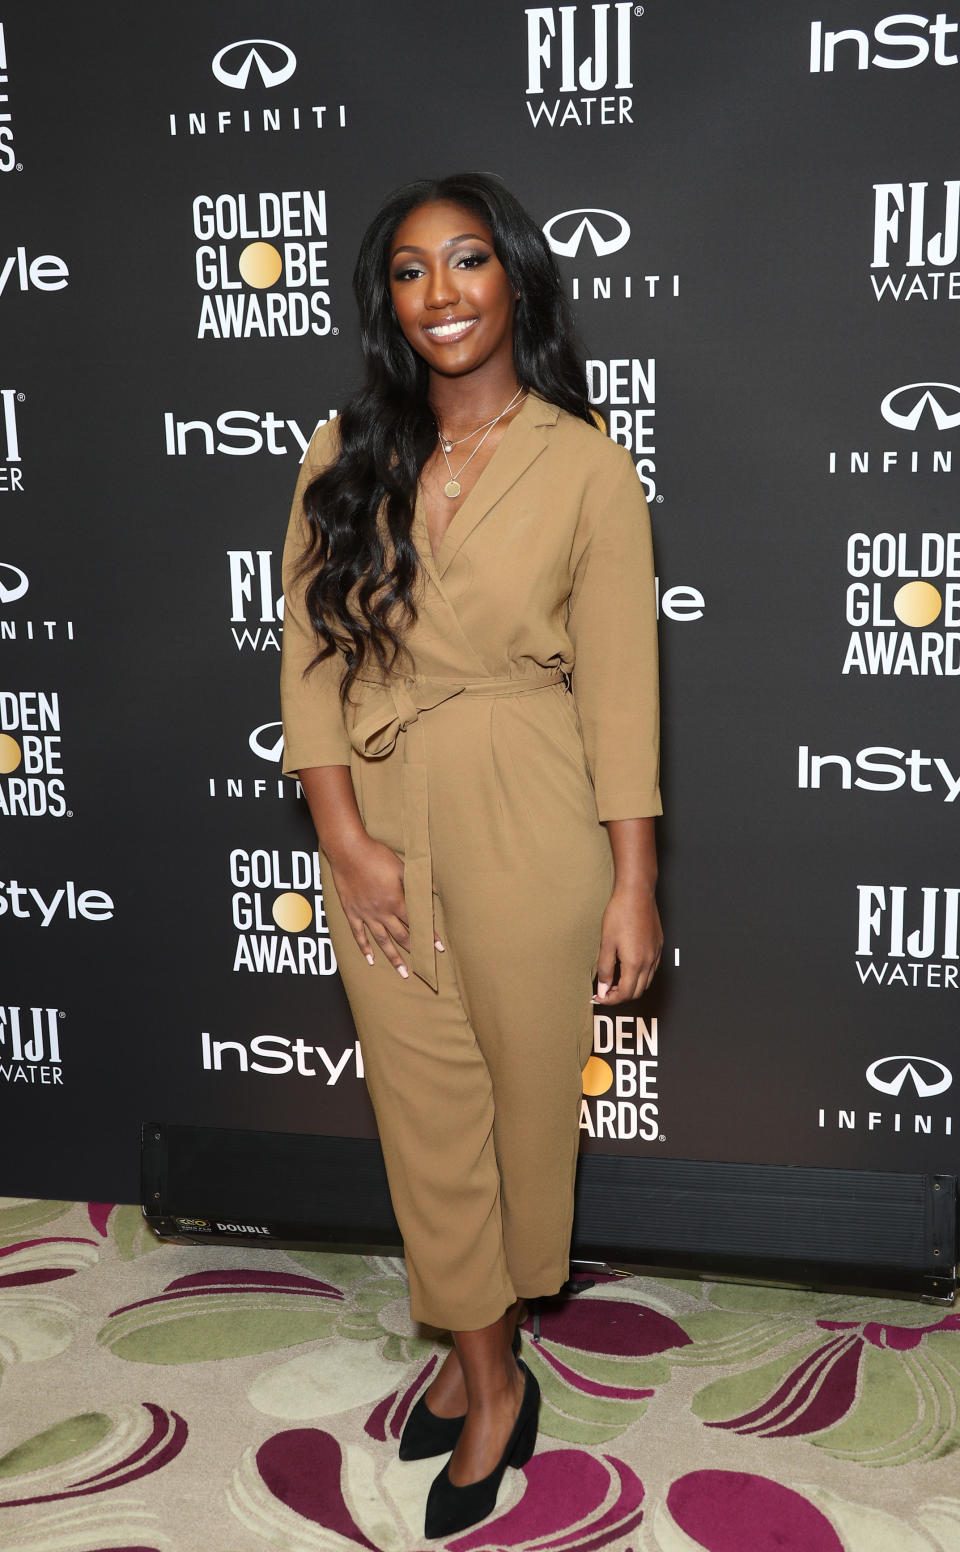 Isan Elba at the Nov. 14 event announcing that she is the 2019 Golden Globe ambassador, following in the footsteps of the Rock’s eldest daughter, Simone Johnson. (Photo: Frederick M. Brown/Getty Images)